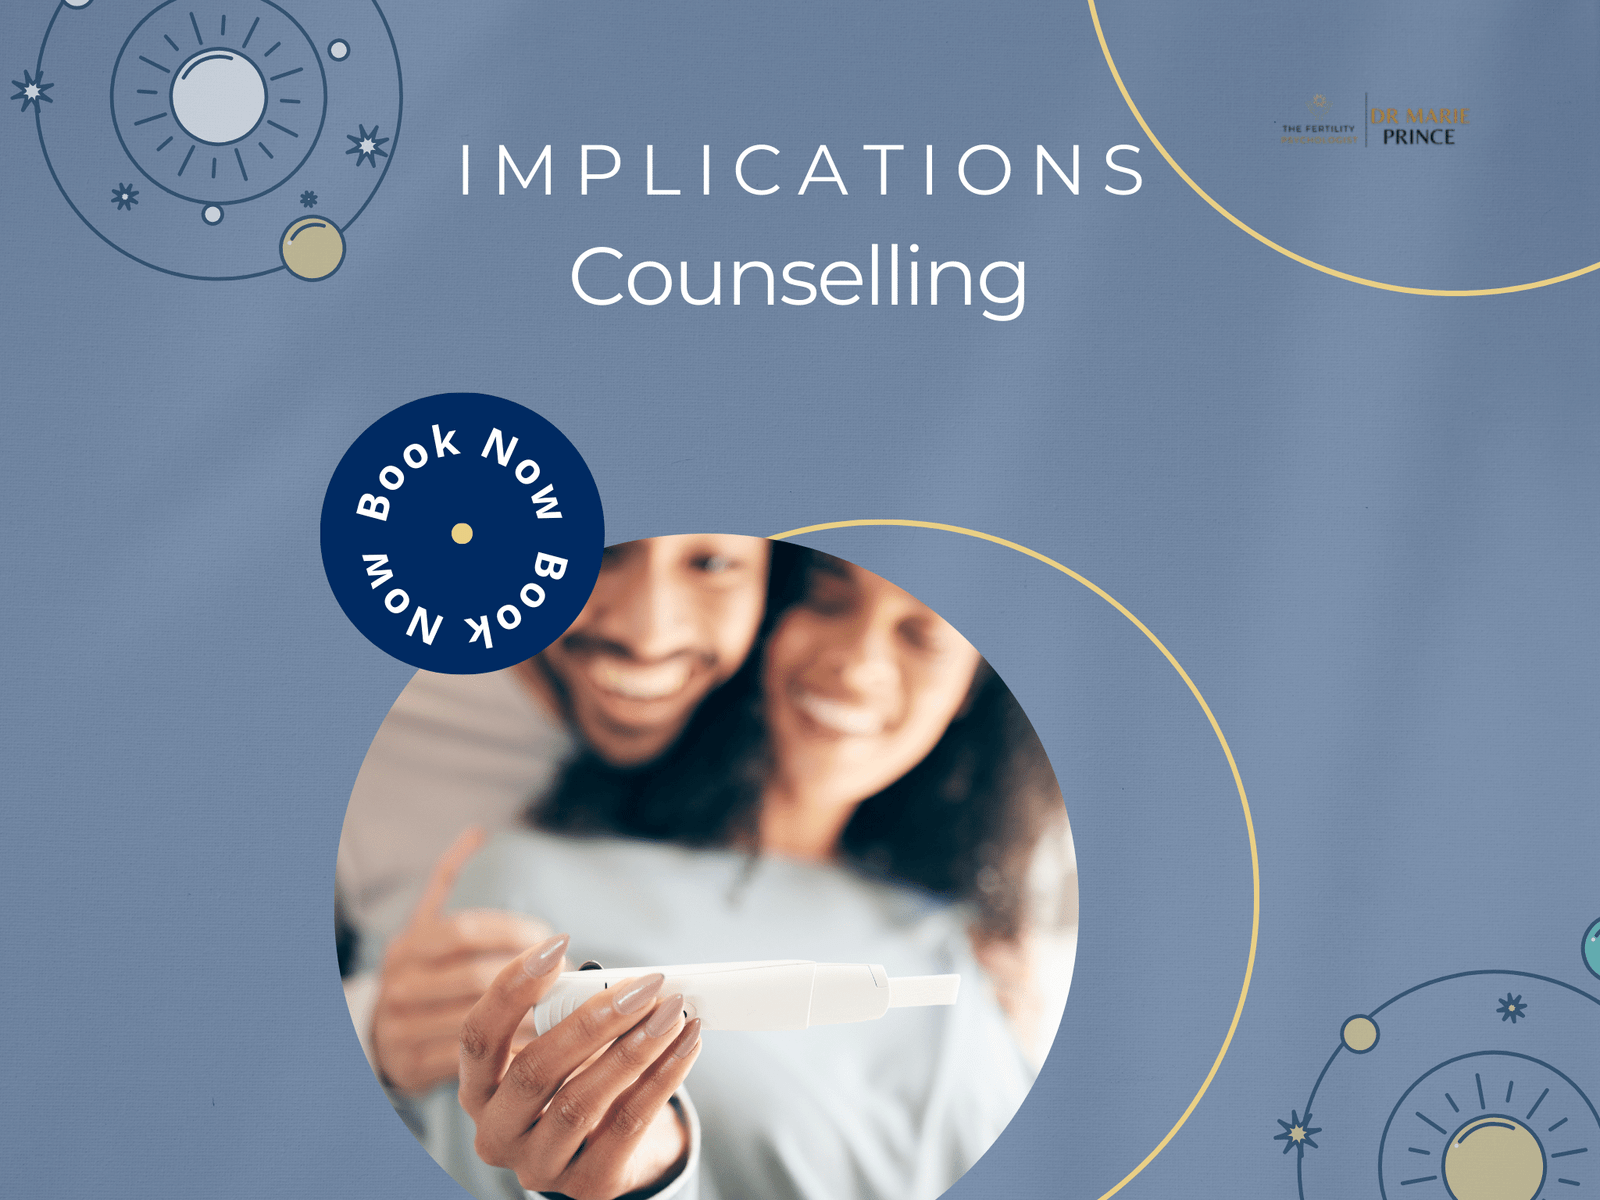 Implications counselling